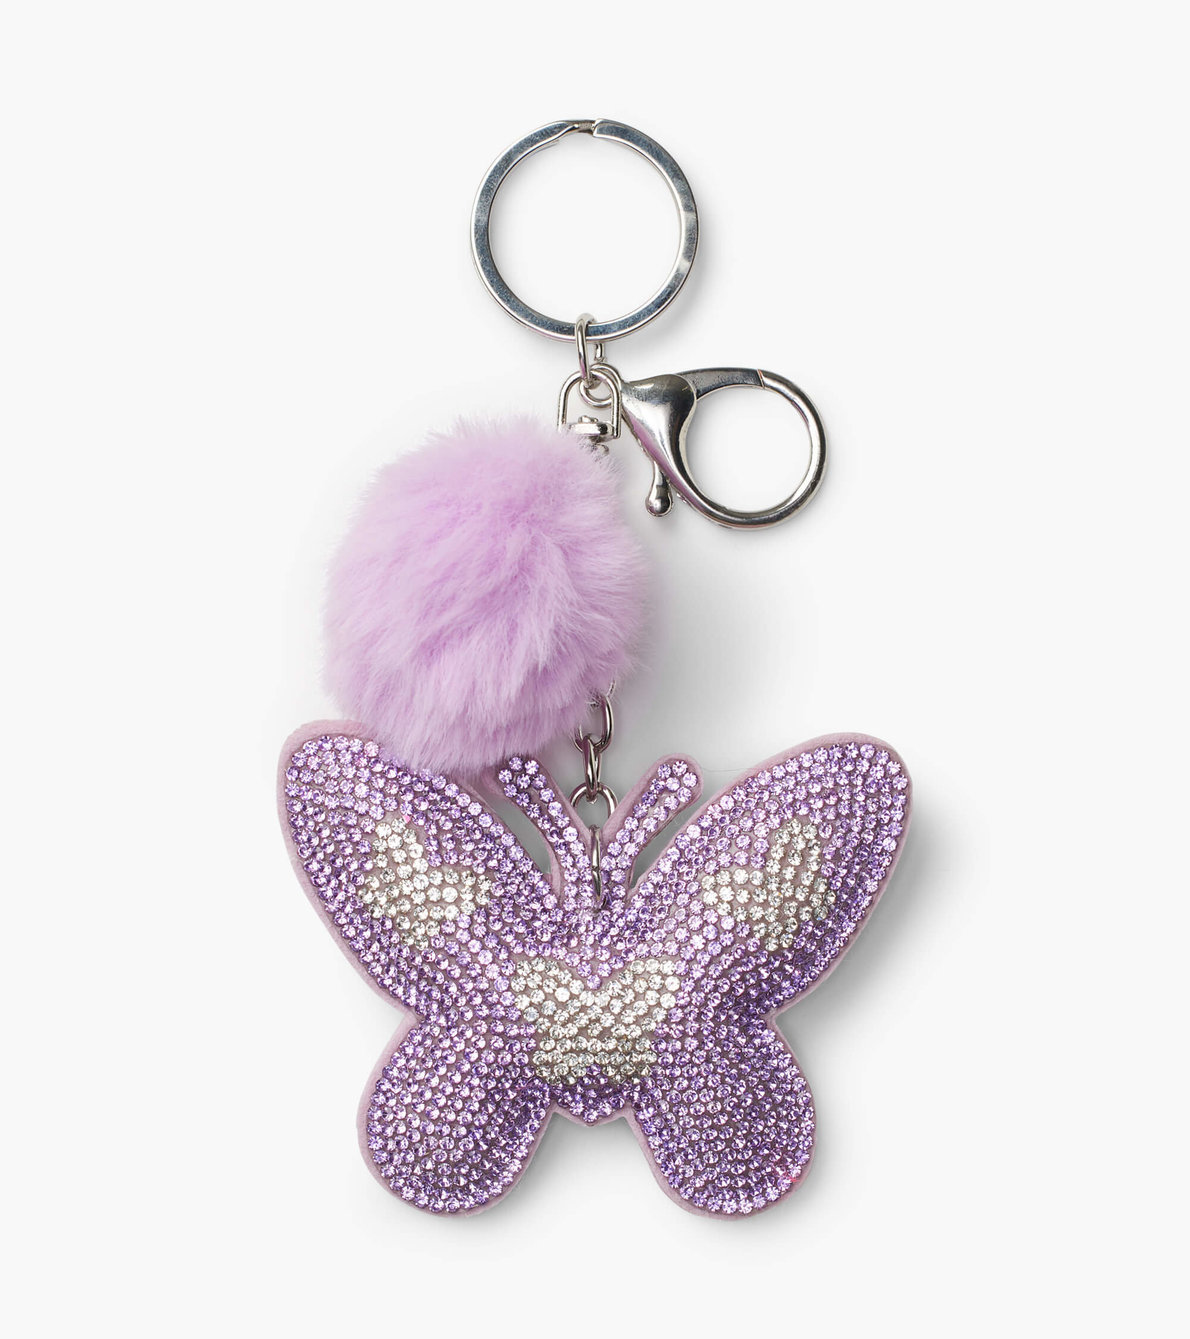 View larger image of Fluttering Butterfly Bag Charm